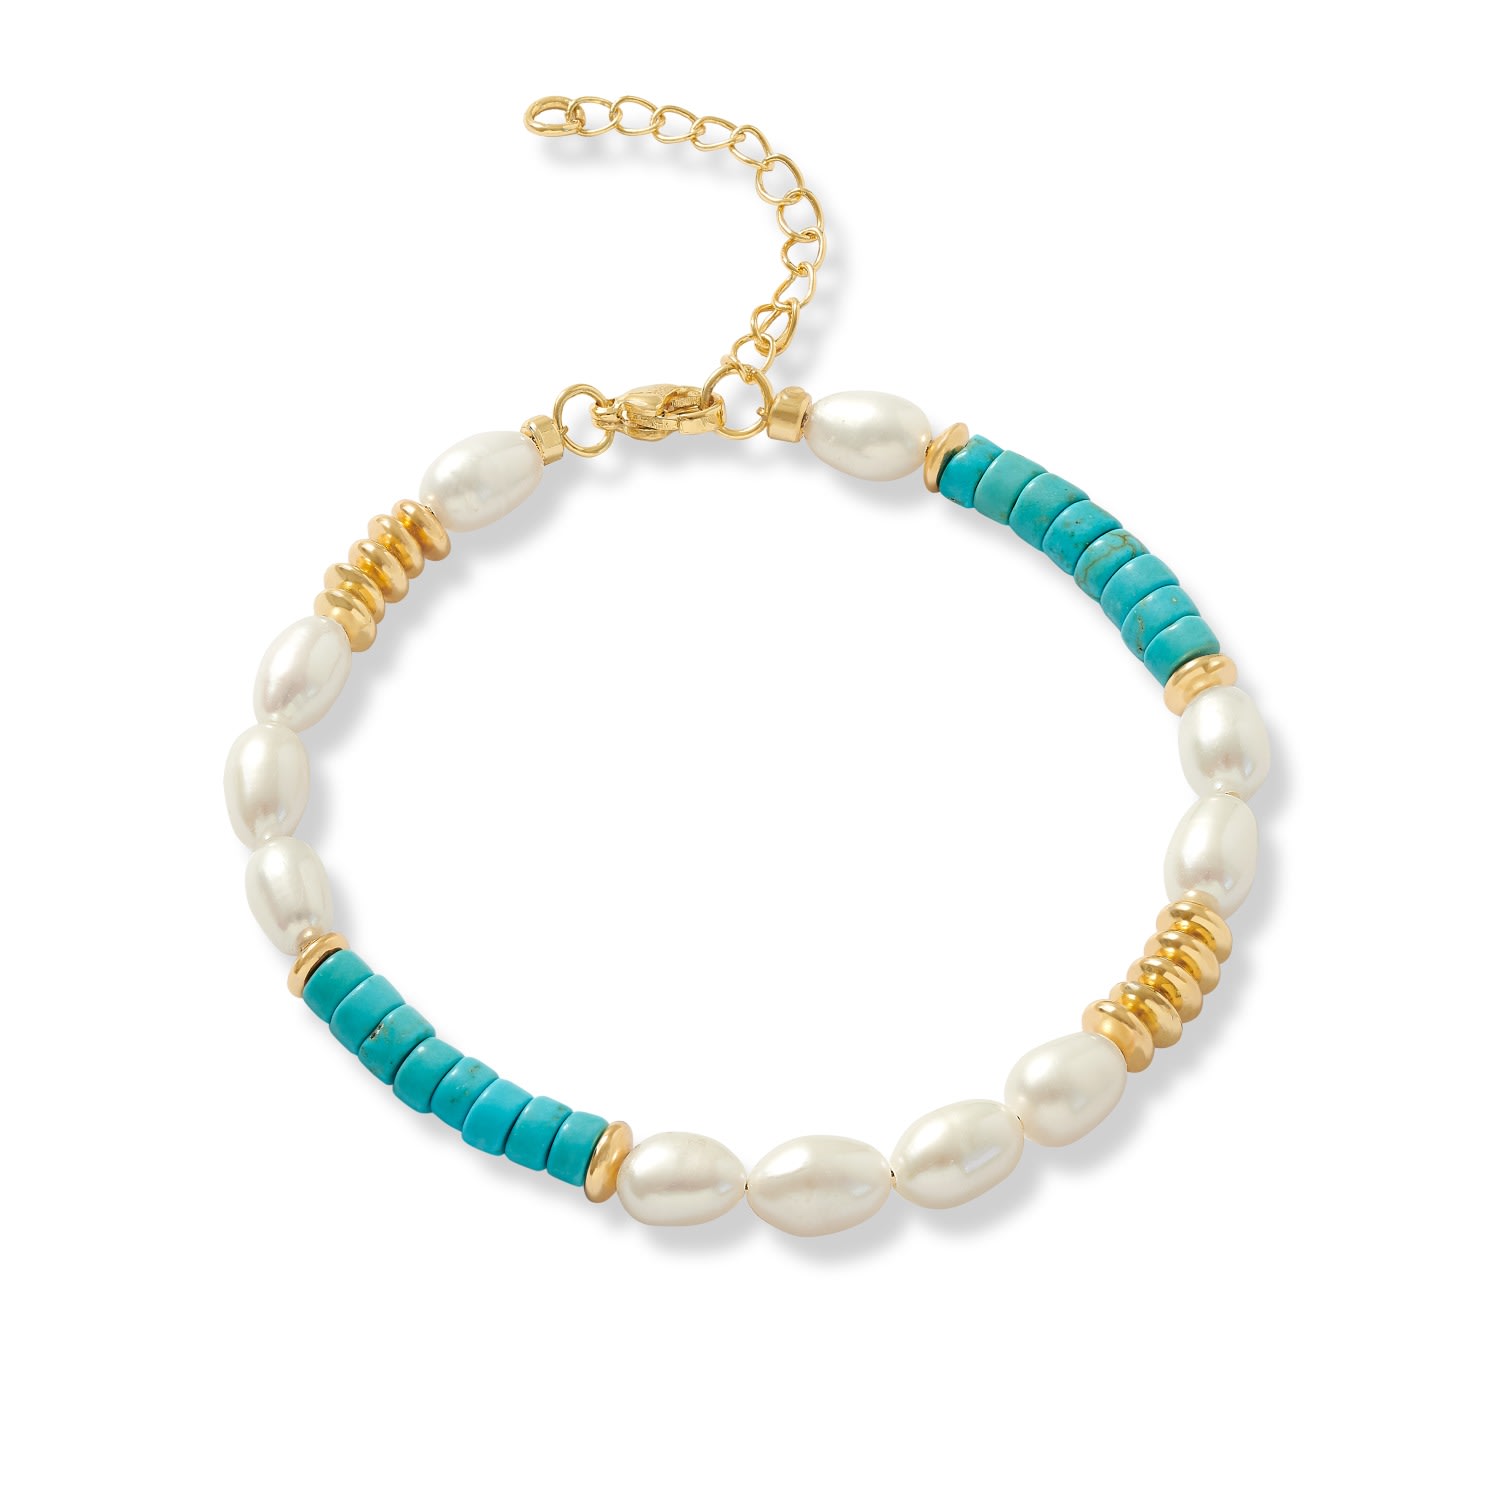 Women’s Gold / Blue / White Nova Oval Cultured Freshwater Pearls Bracelet With Turquoise & Gold Beads Pearls of the Orient Online